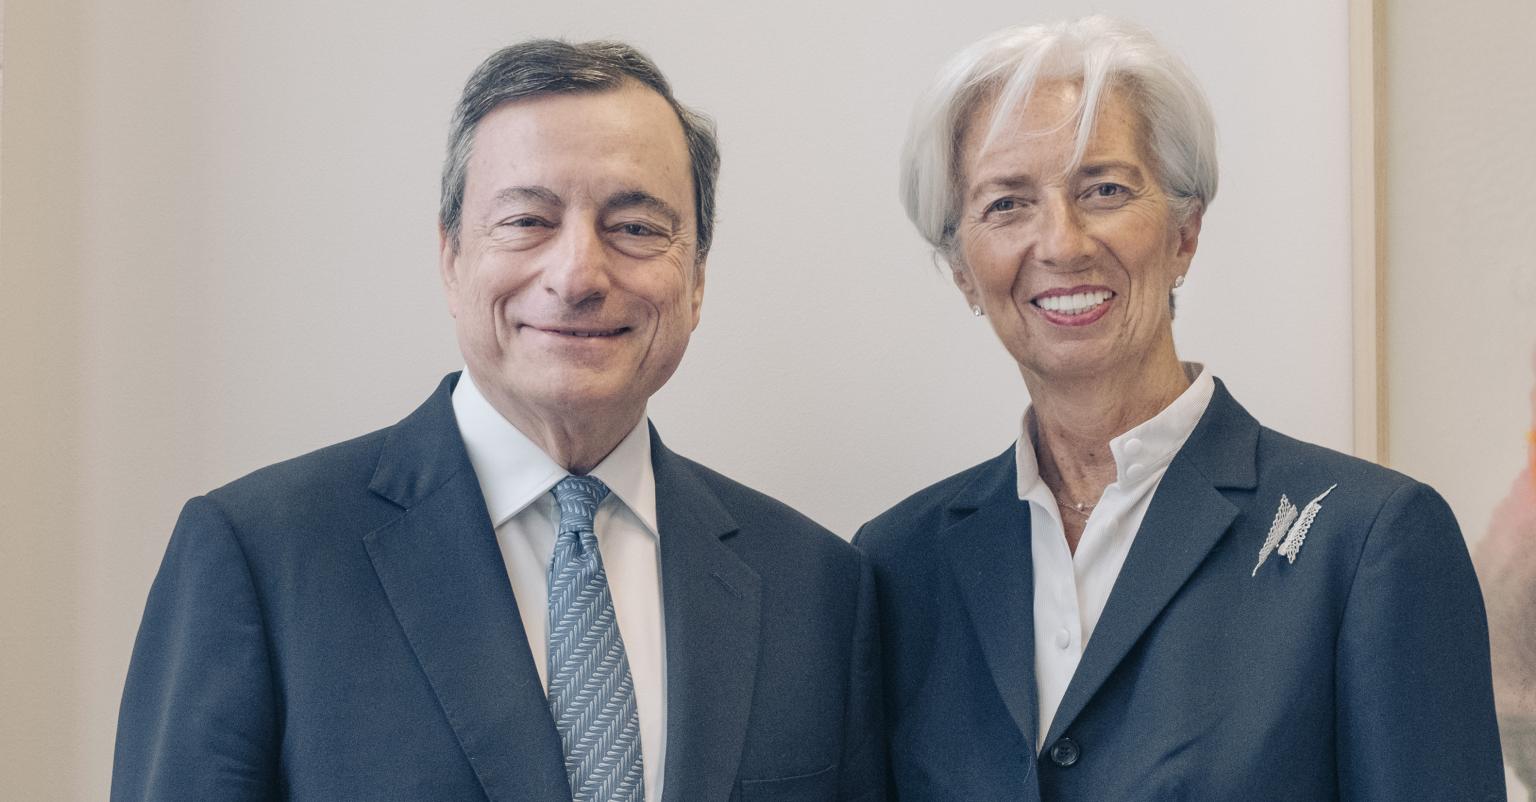 Outgoing President of the European Central Bank, Mario Draghi and incoming Christine Lagarde.